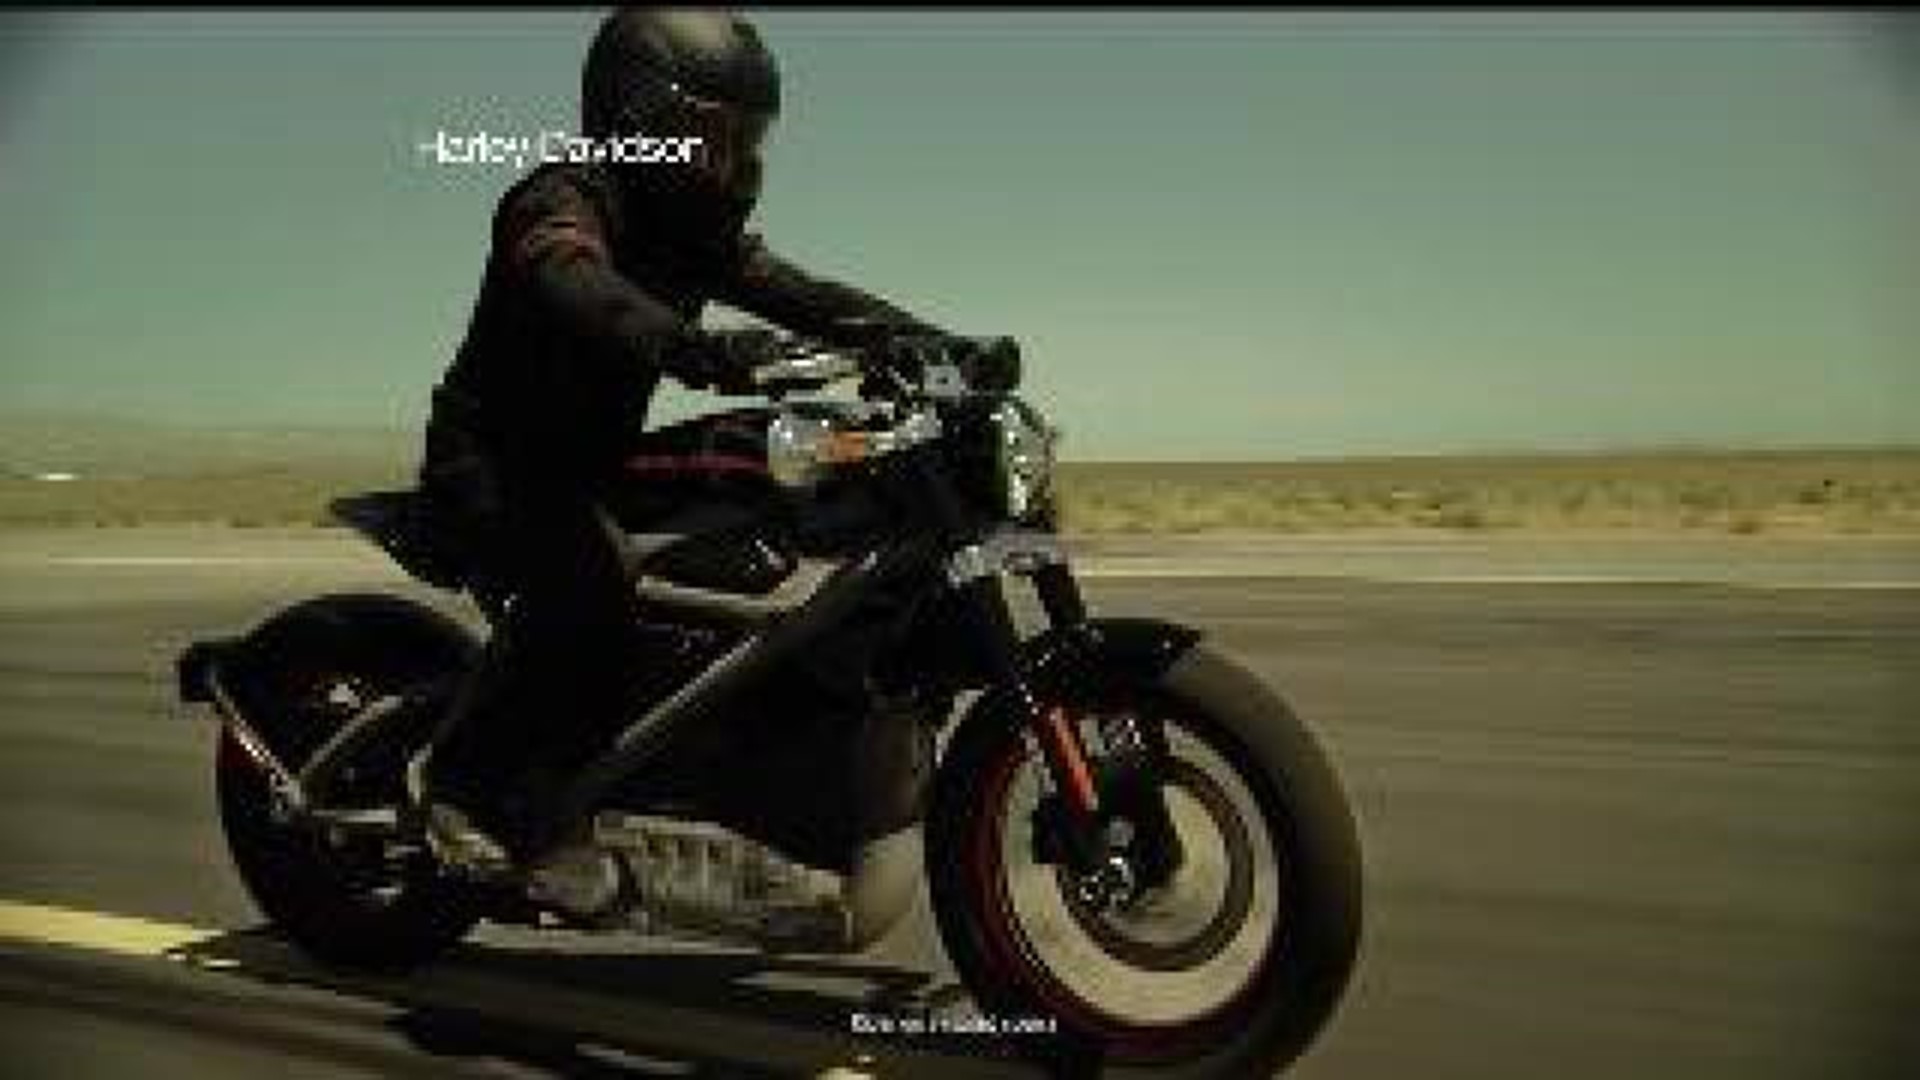 Harley Davidson builds electric motorcycle